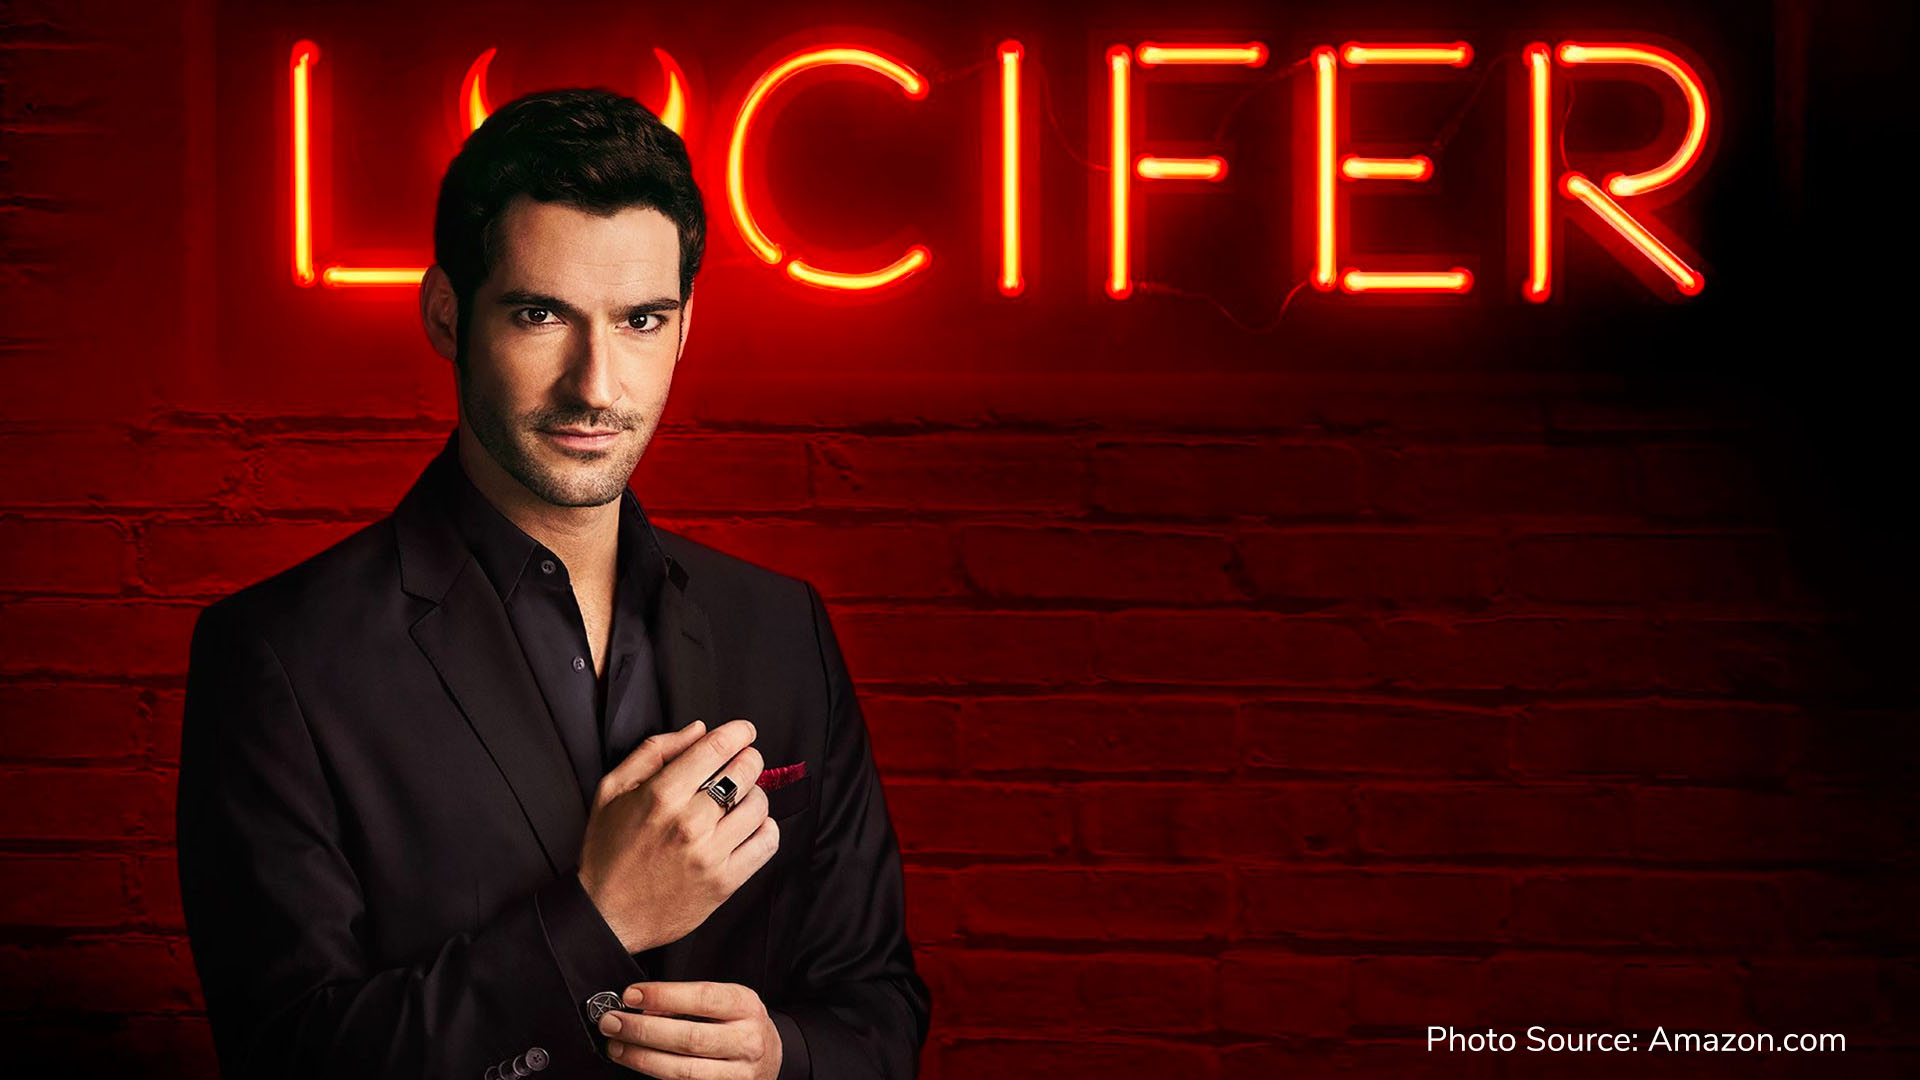 Lucifer Season 5 Part 2 to release May 28th